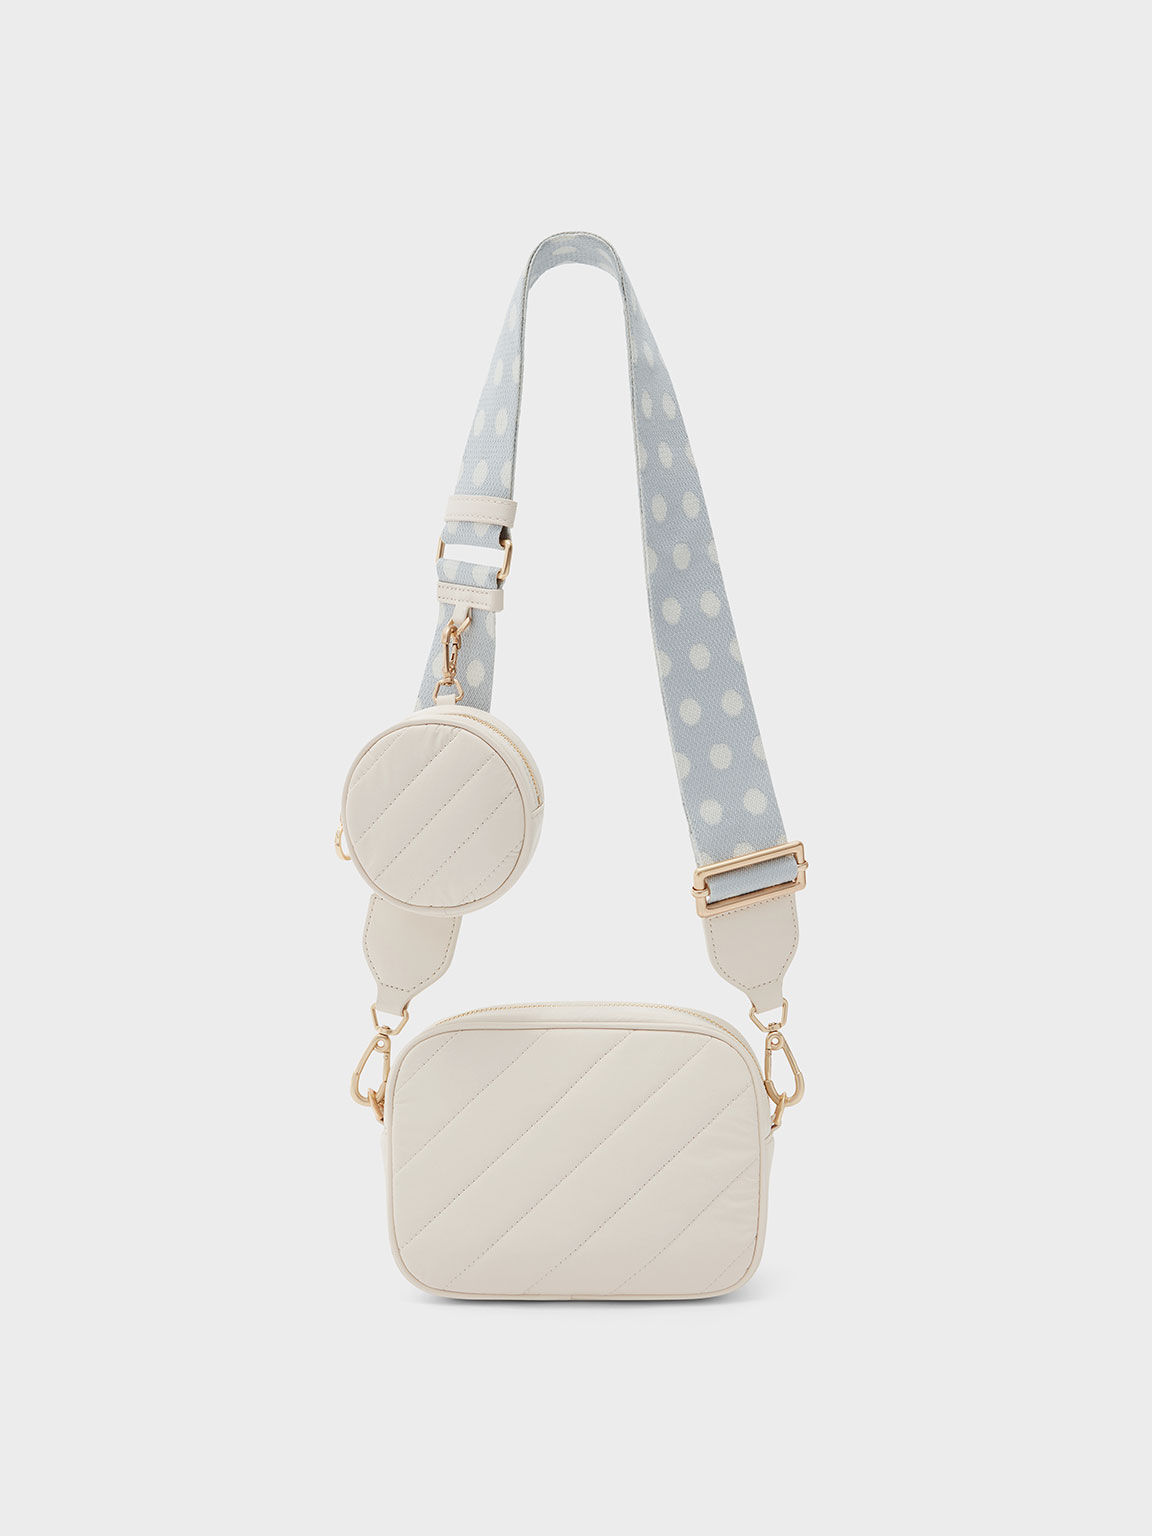 Tas Selempang & Pouch Chailly Panelled, Cream, hi-res